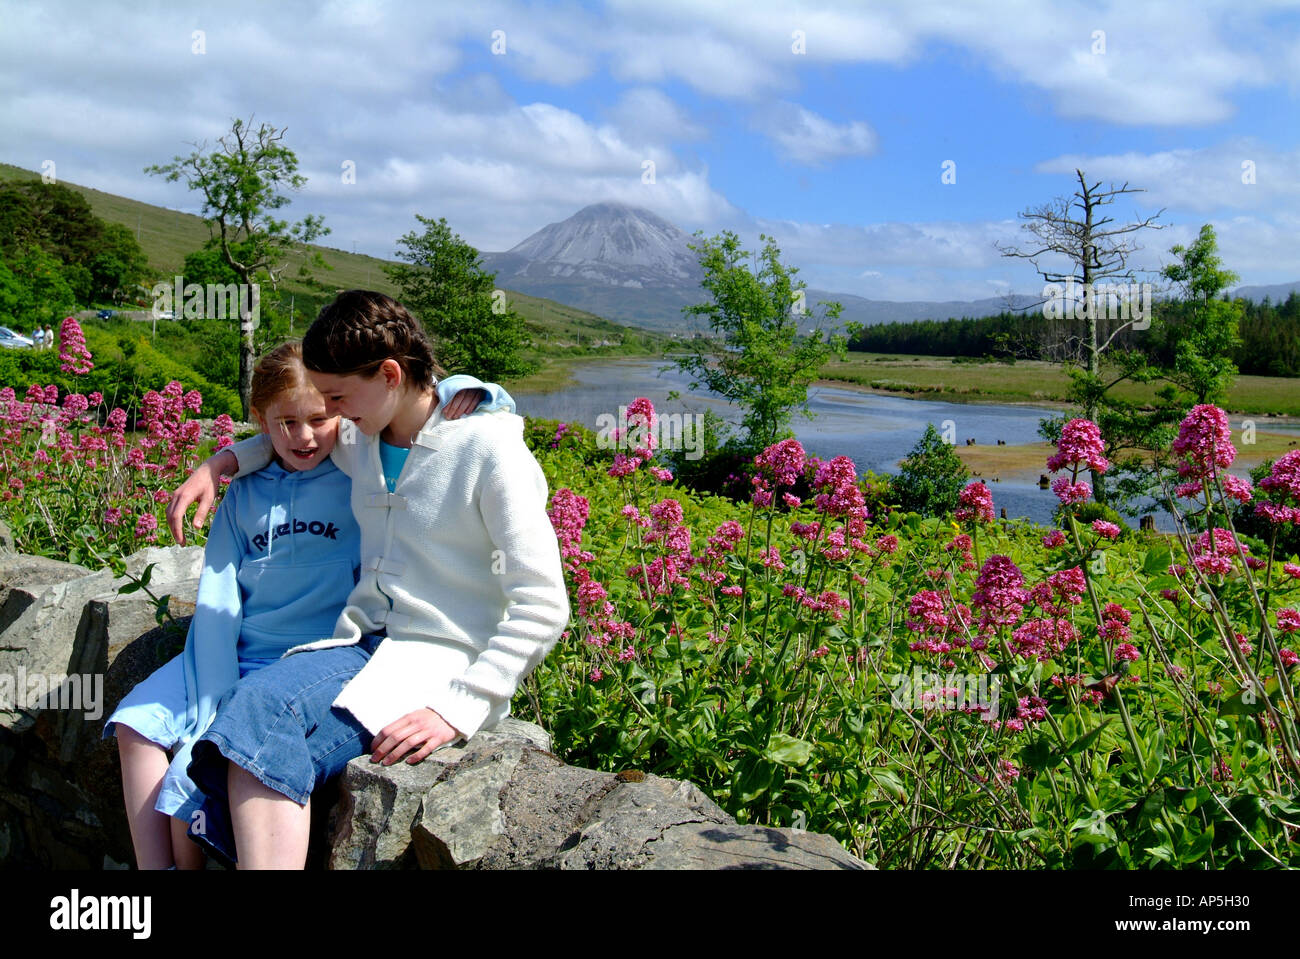 Errigal Mountain, County Donegal, Ireland Stock Photo